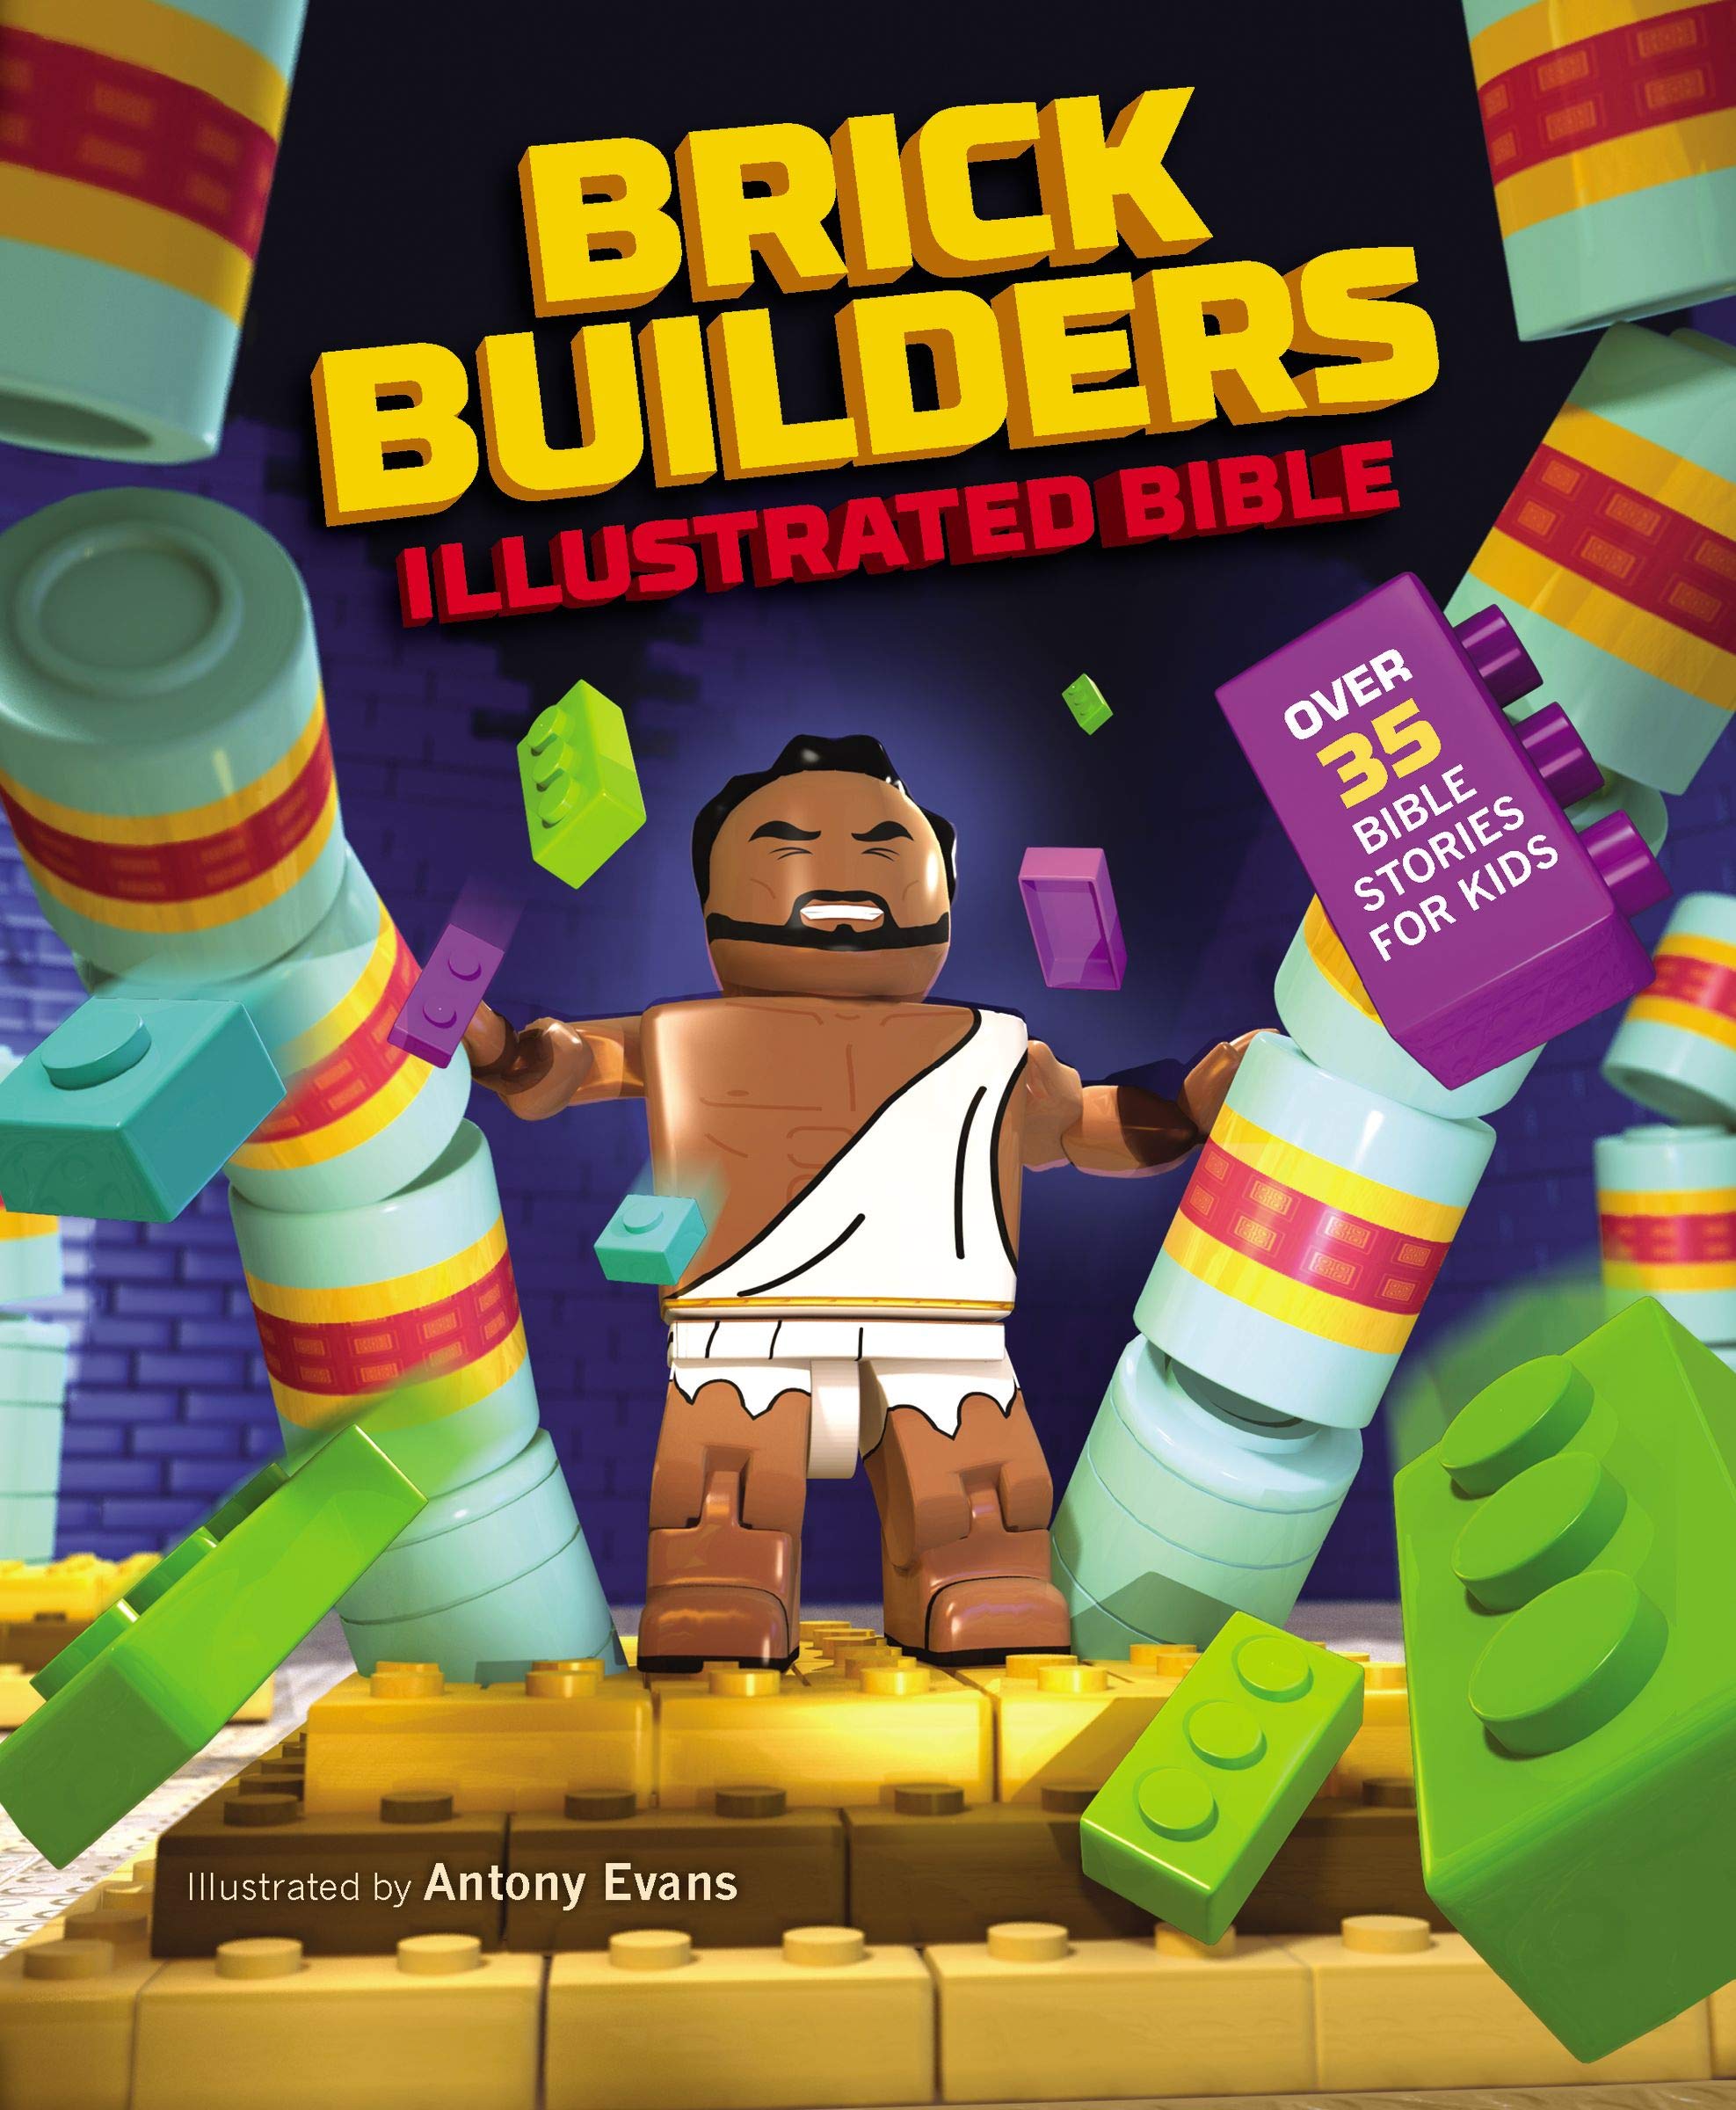 ROCKONLINE | New Creation Church | NCC | Joseph Prince | ROCK Bookshop | ROCK Bookstore | Star Vista | Children | Kids | Bible Story | Illustrated Bible | Christian Living | Boardbook | Bible | Brick Builder's Illustrated Bible, hardcover | Free delivery for SG orders above $50.